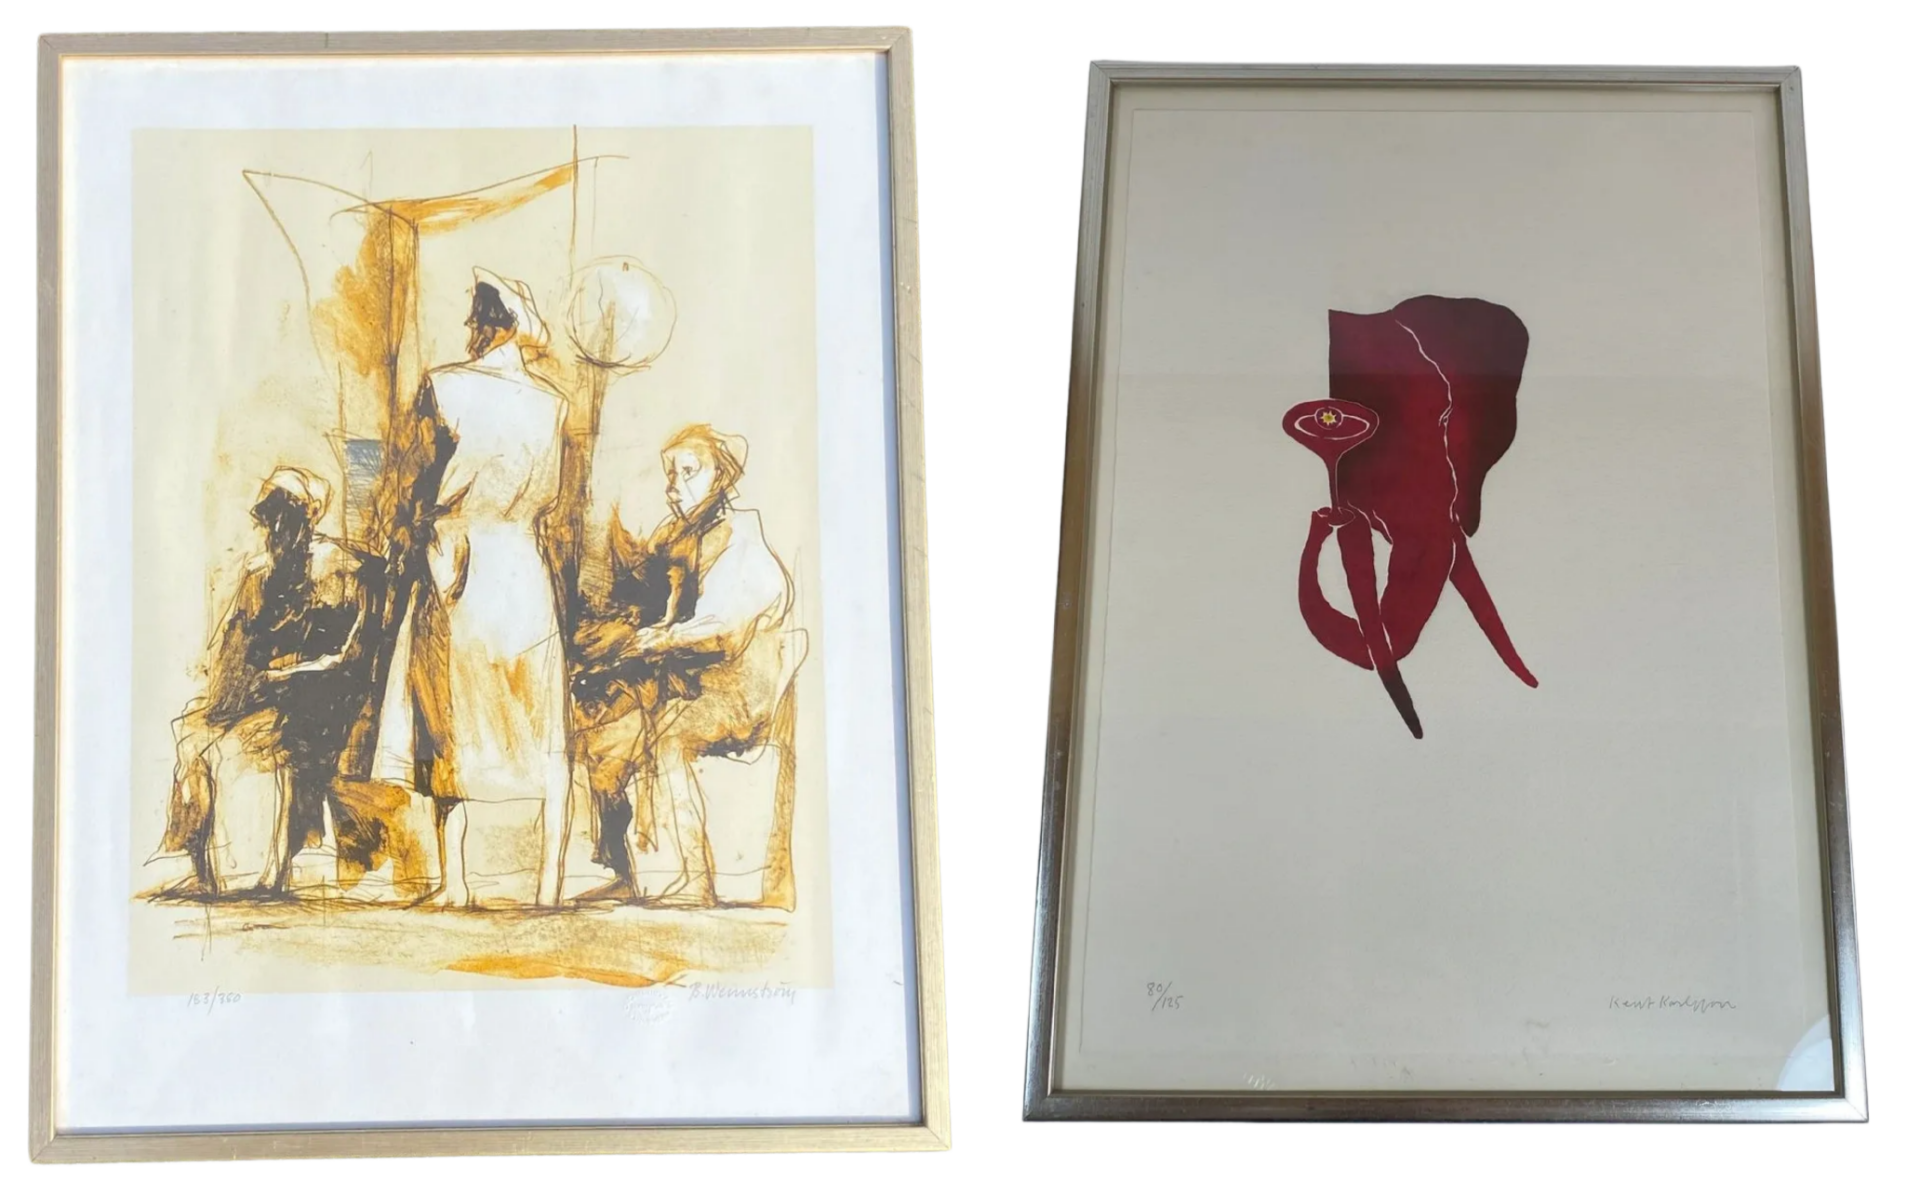 TWO MID CENTURY SWEDISH LIMITED EDITION PENCIL SIGNED PRINTS - KENT KARLSSON (80/125) AND BERNDT